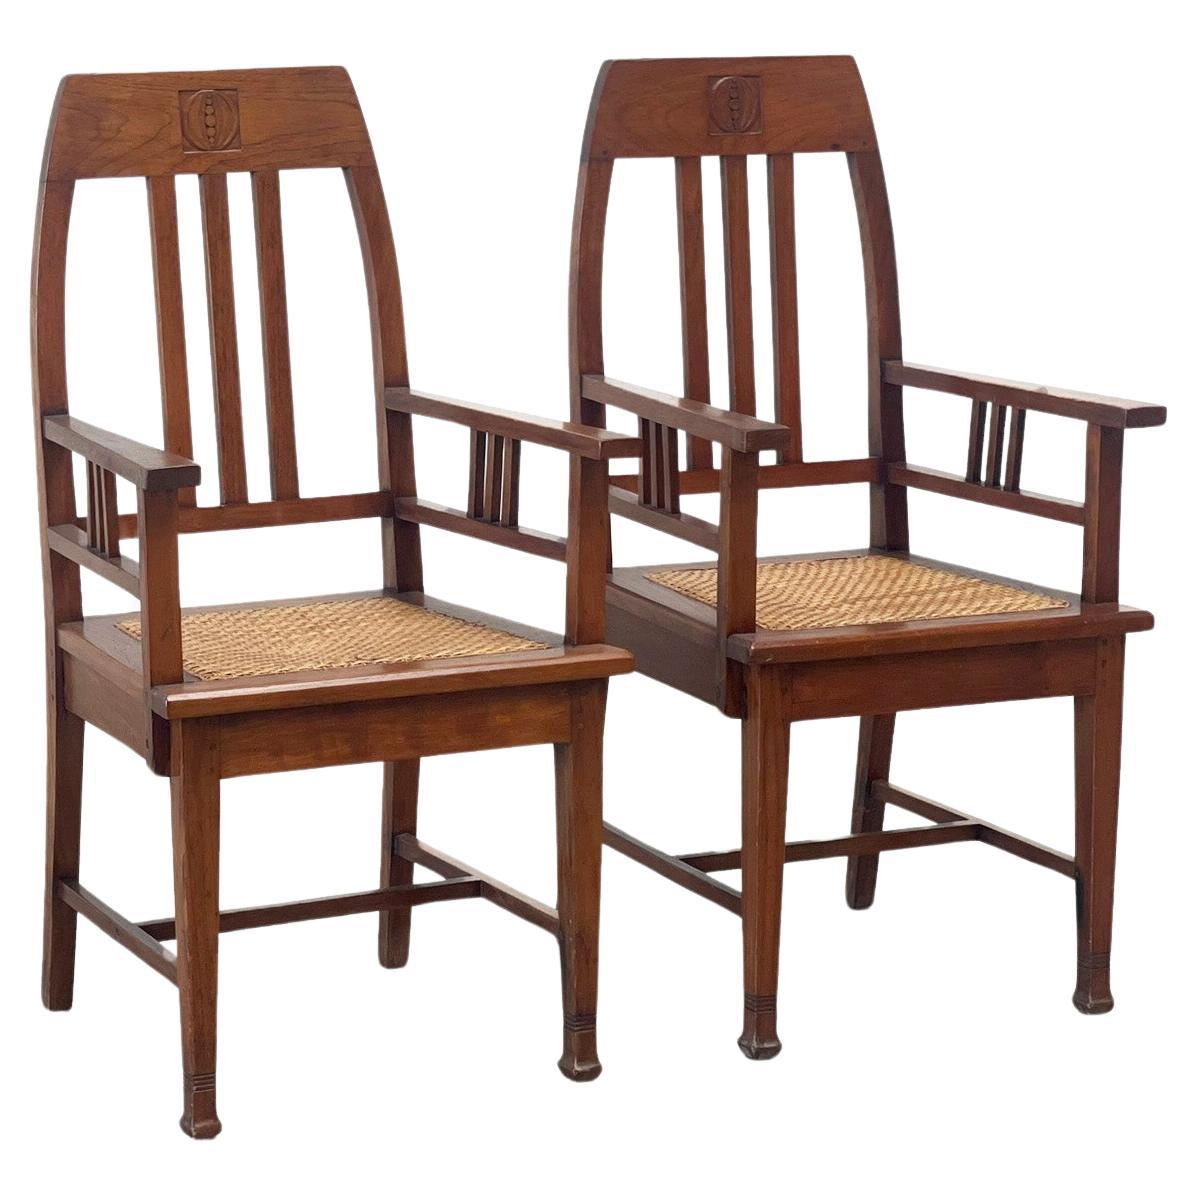 Couple of 1940's Amsterdamse school easy chairs For Sale